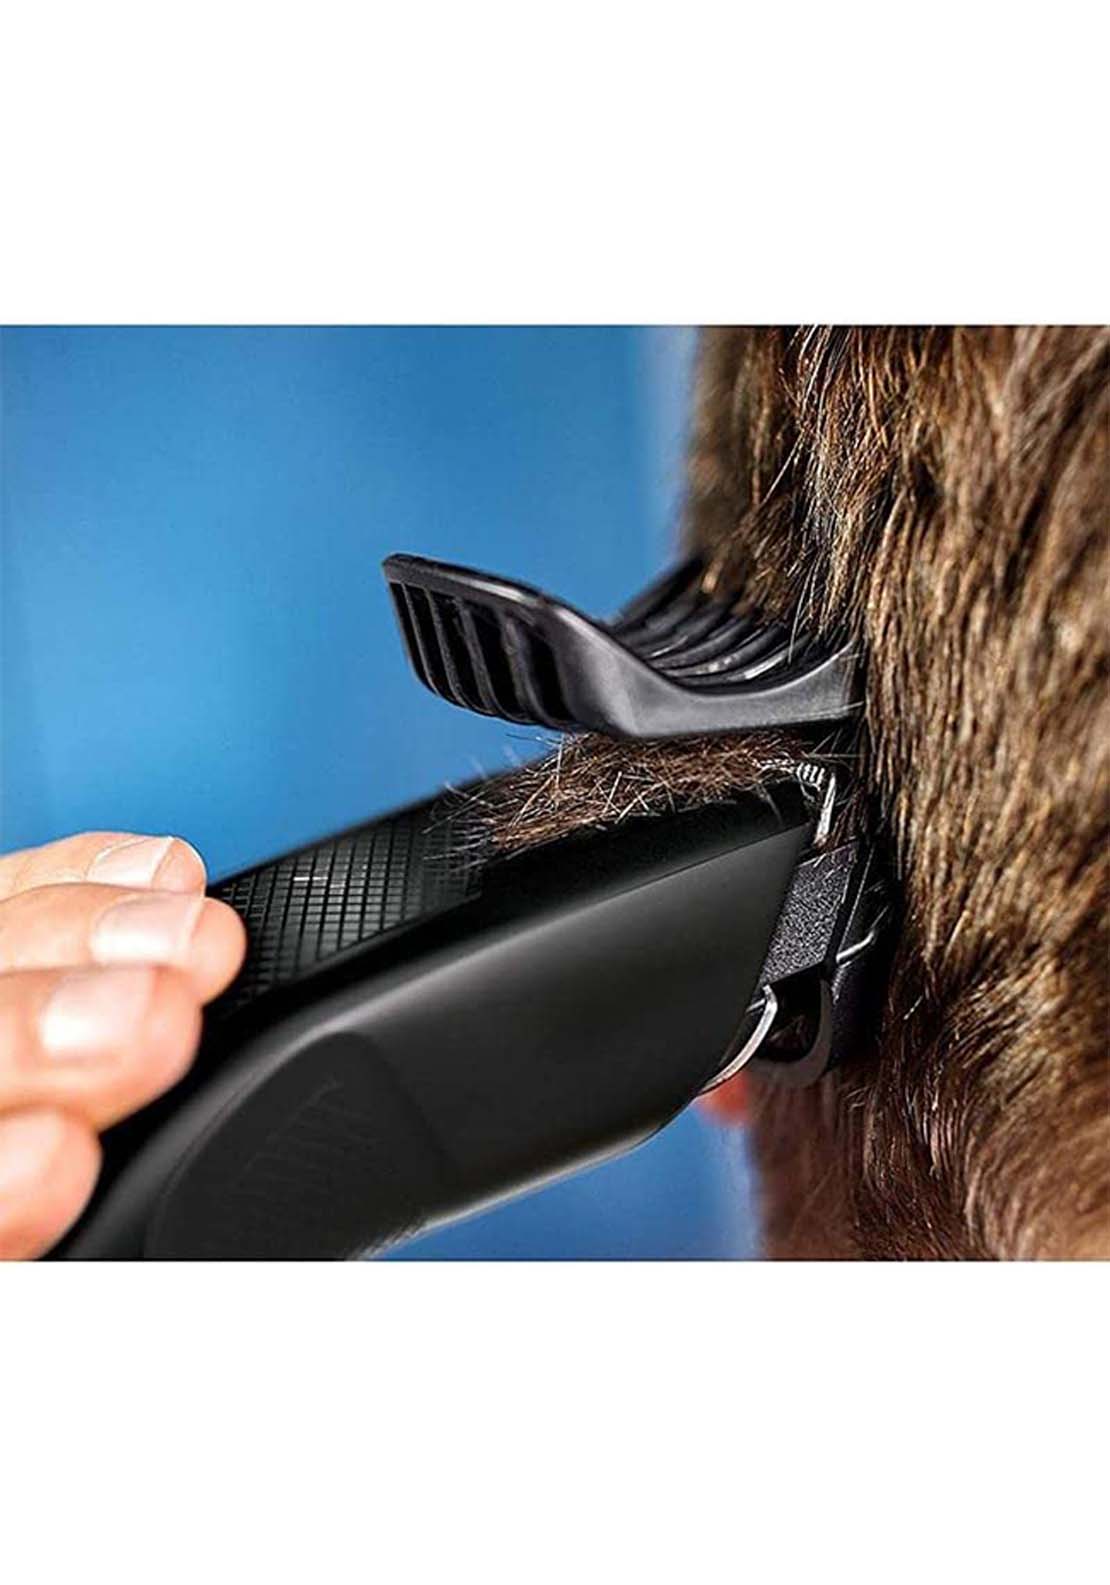 Philips Hairclipper S3 Corded - Black | Hc351013 7 Shaws Department Stores